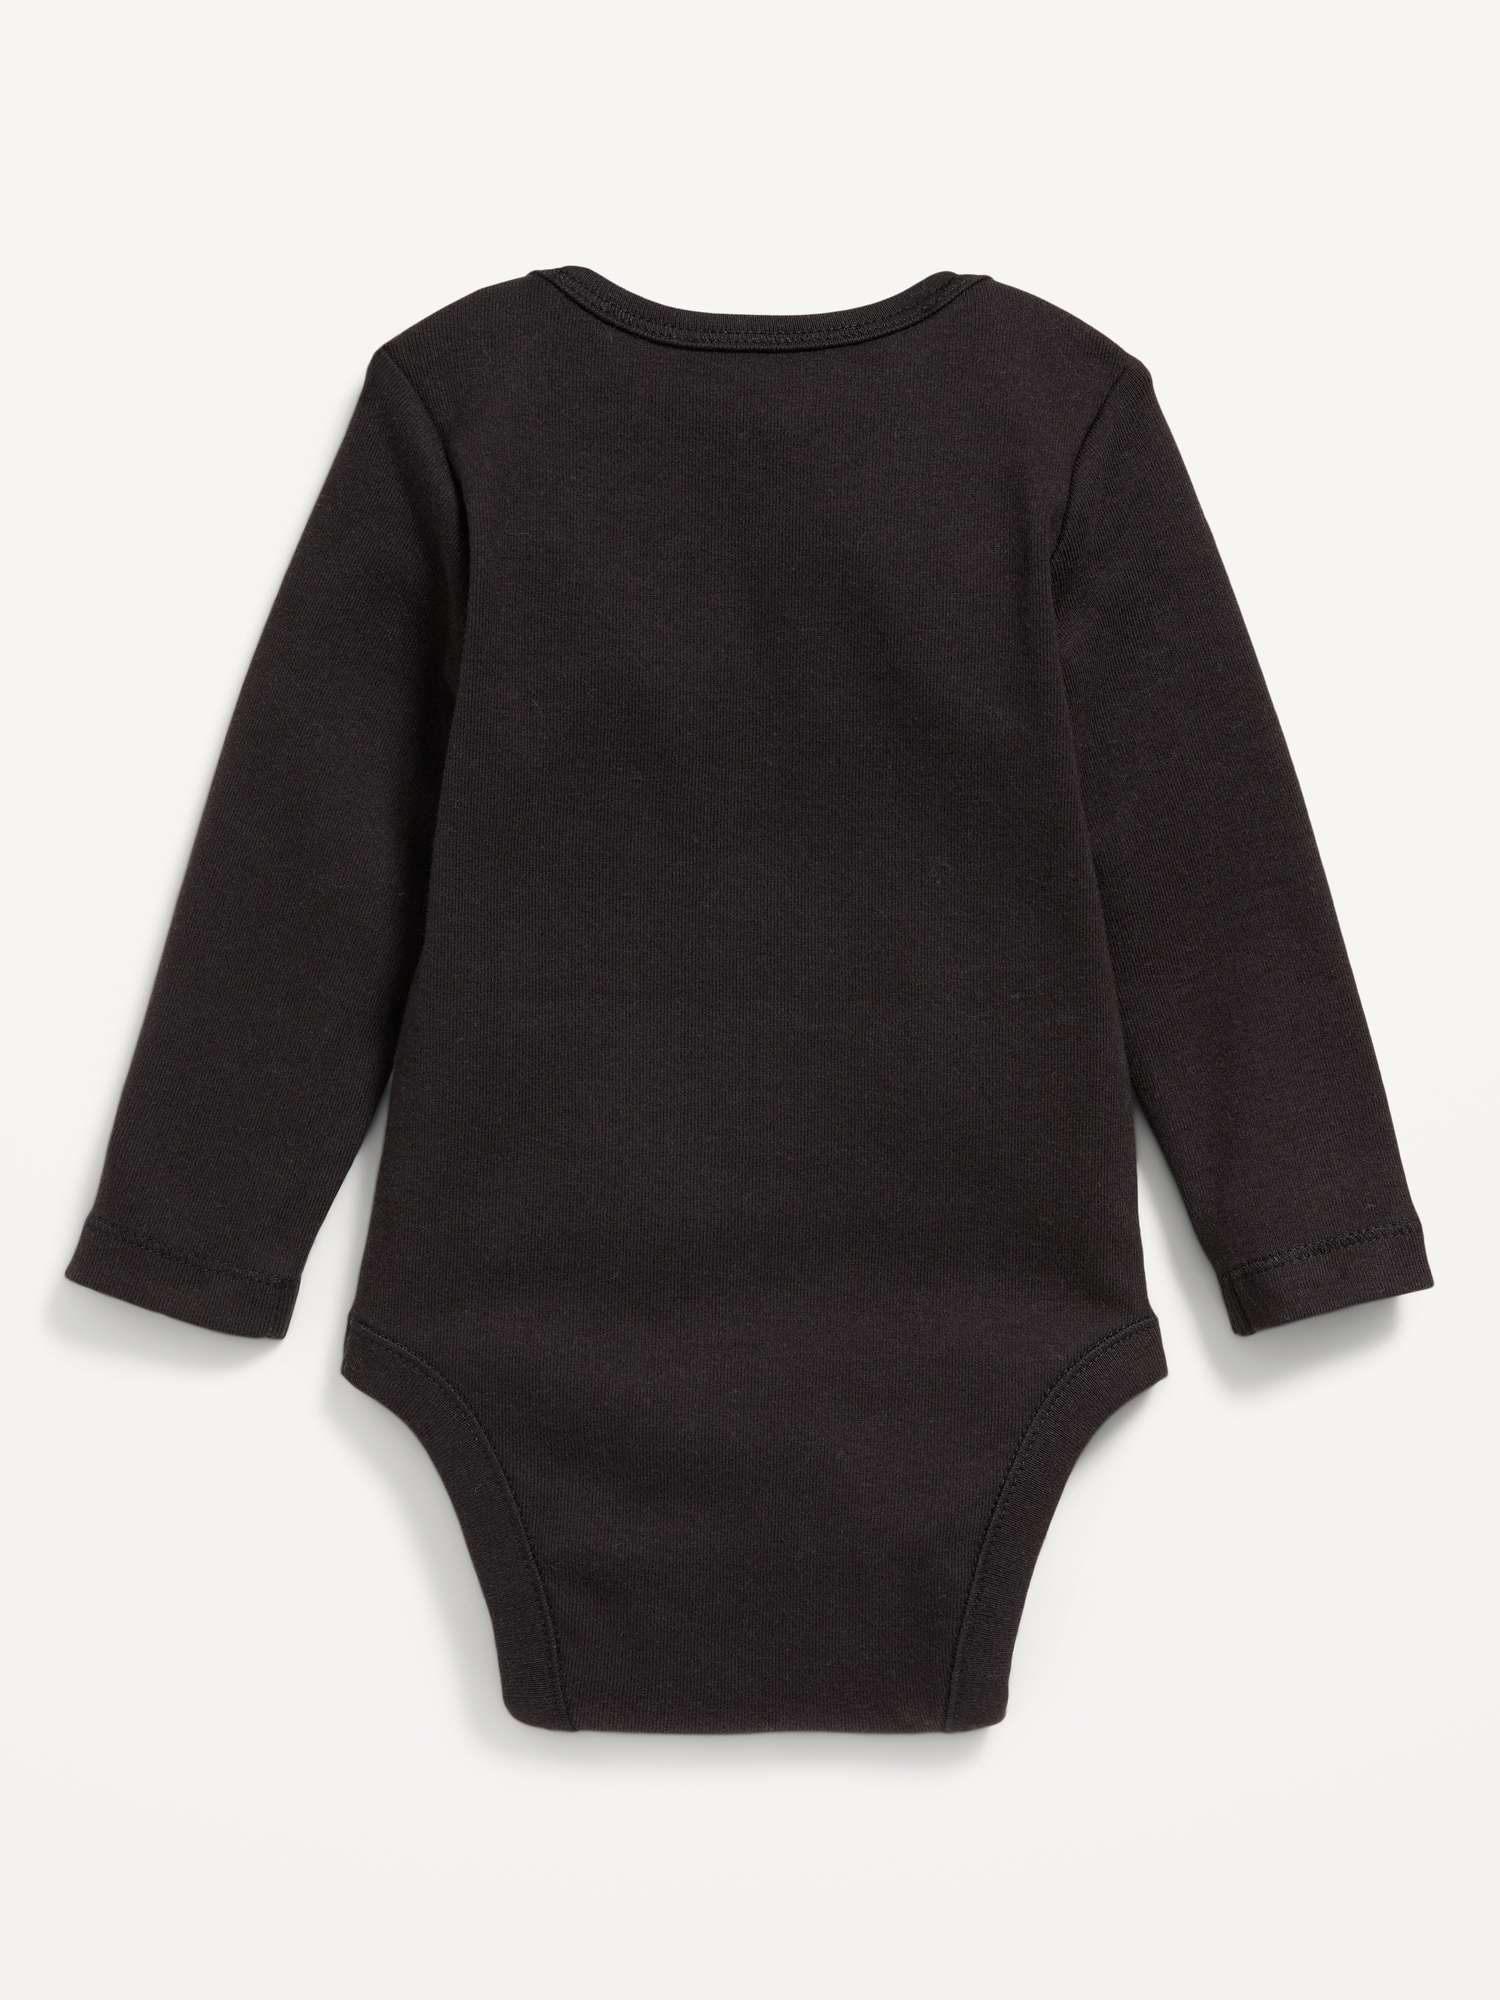 Long-Sleeve Graphic Bodysuit for Baby | Old Navy